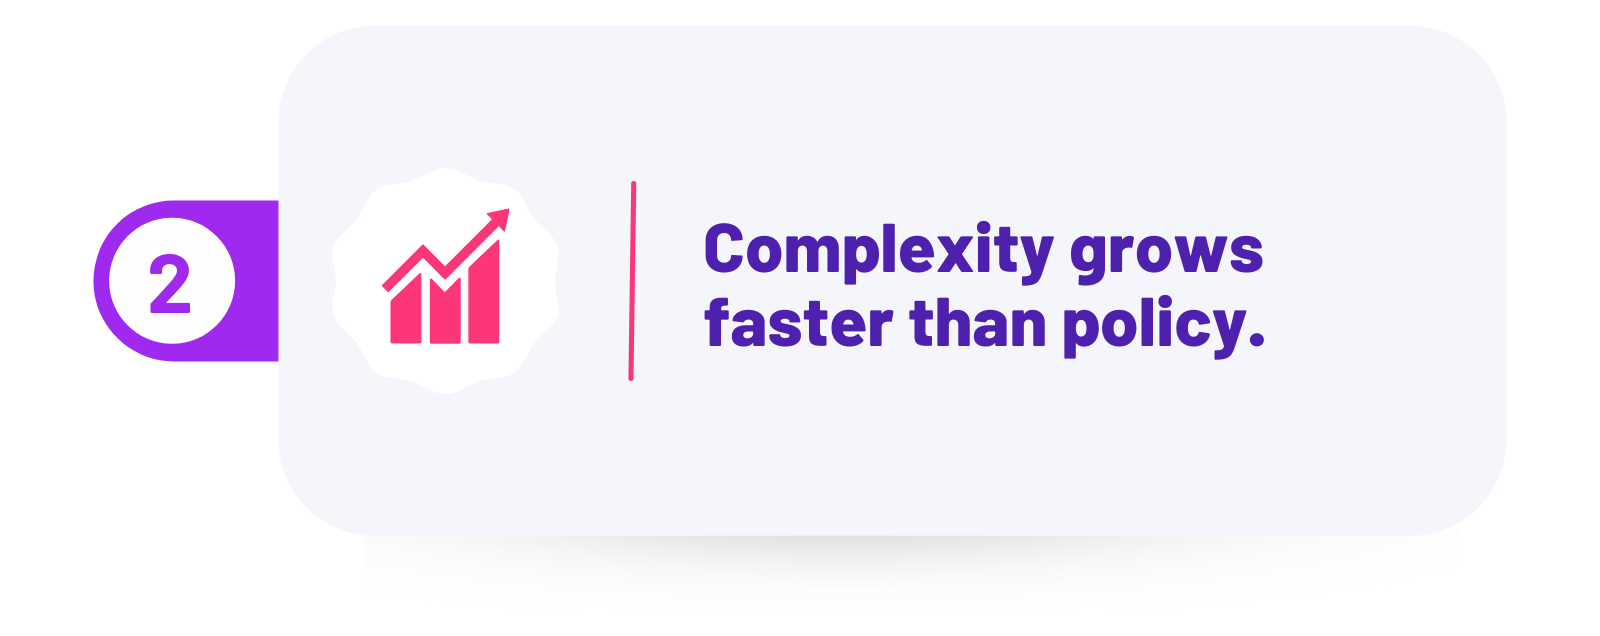 Complexity grows faster than policy